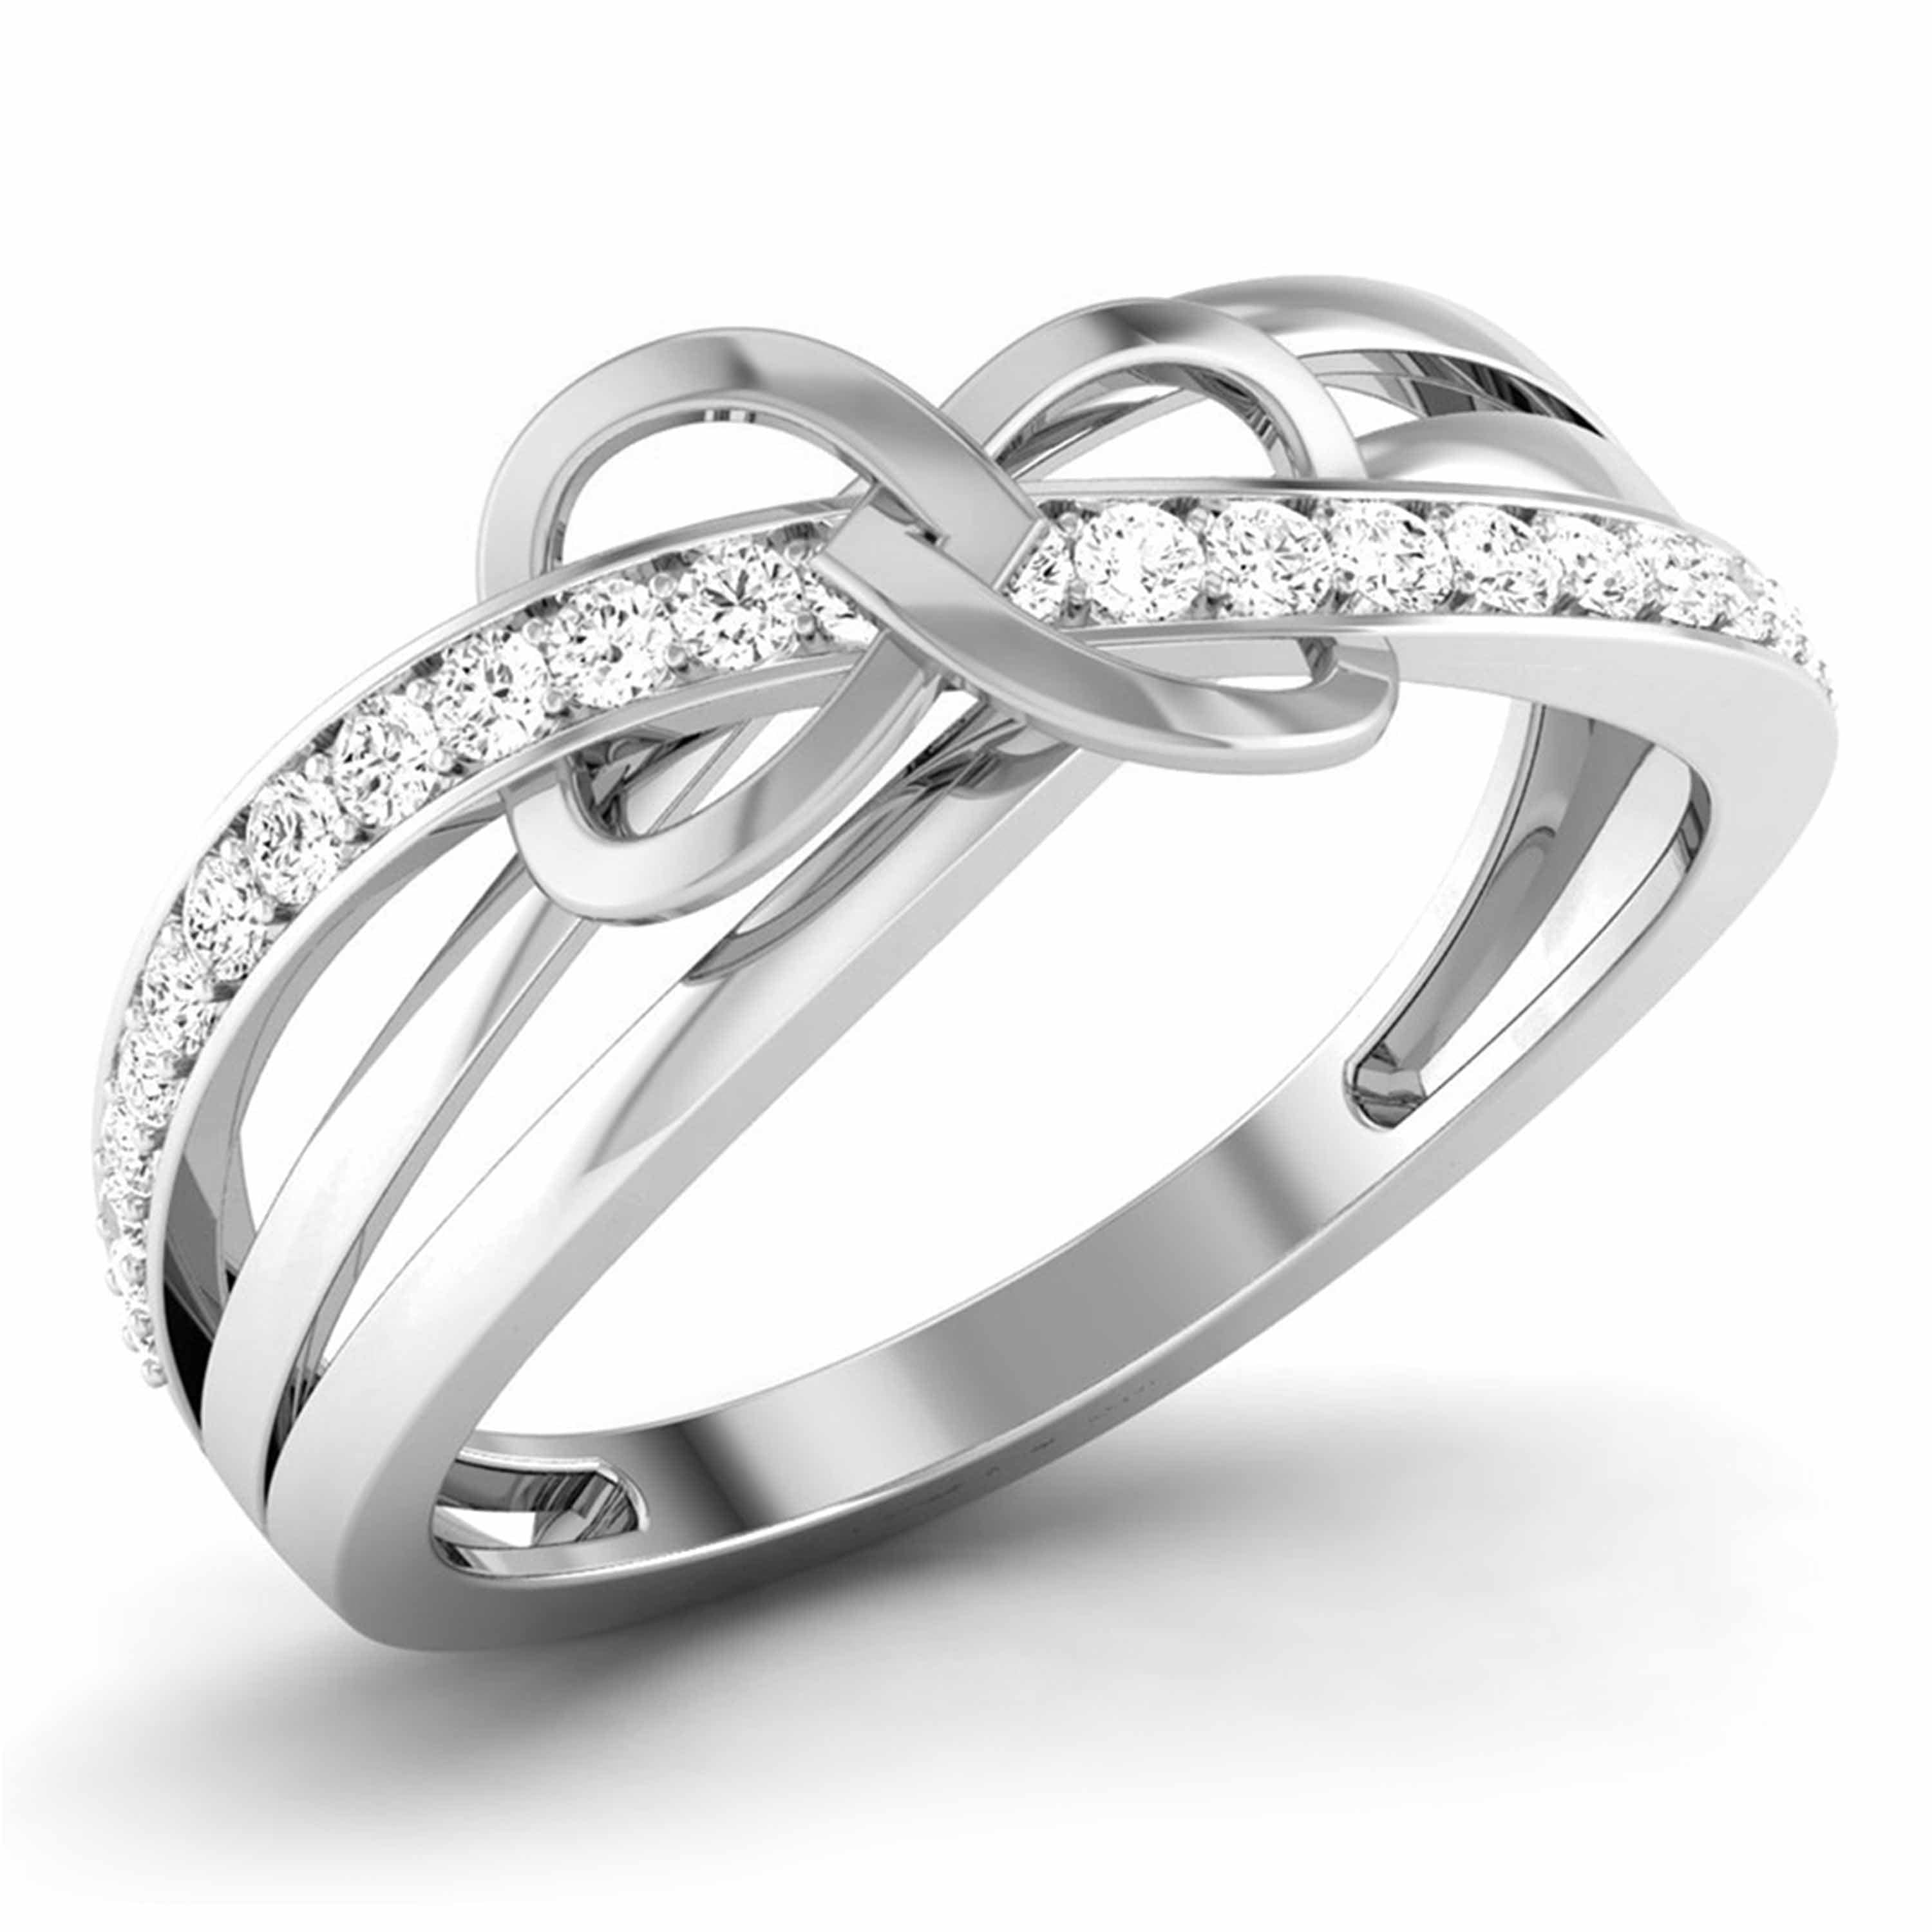 Commitment Ring Styles - Unique & Ethical - Lebrusan Studio